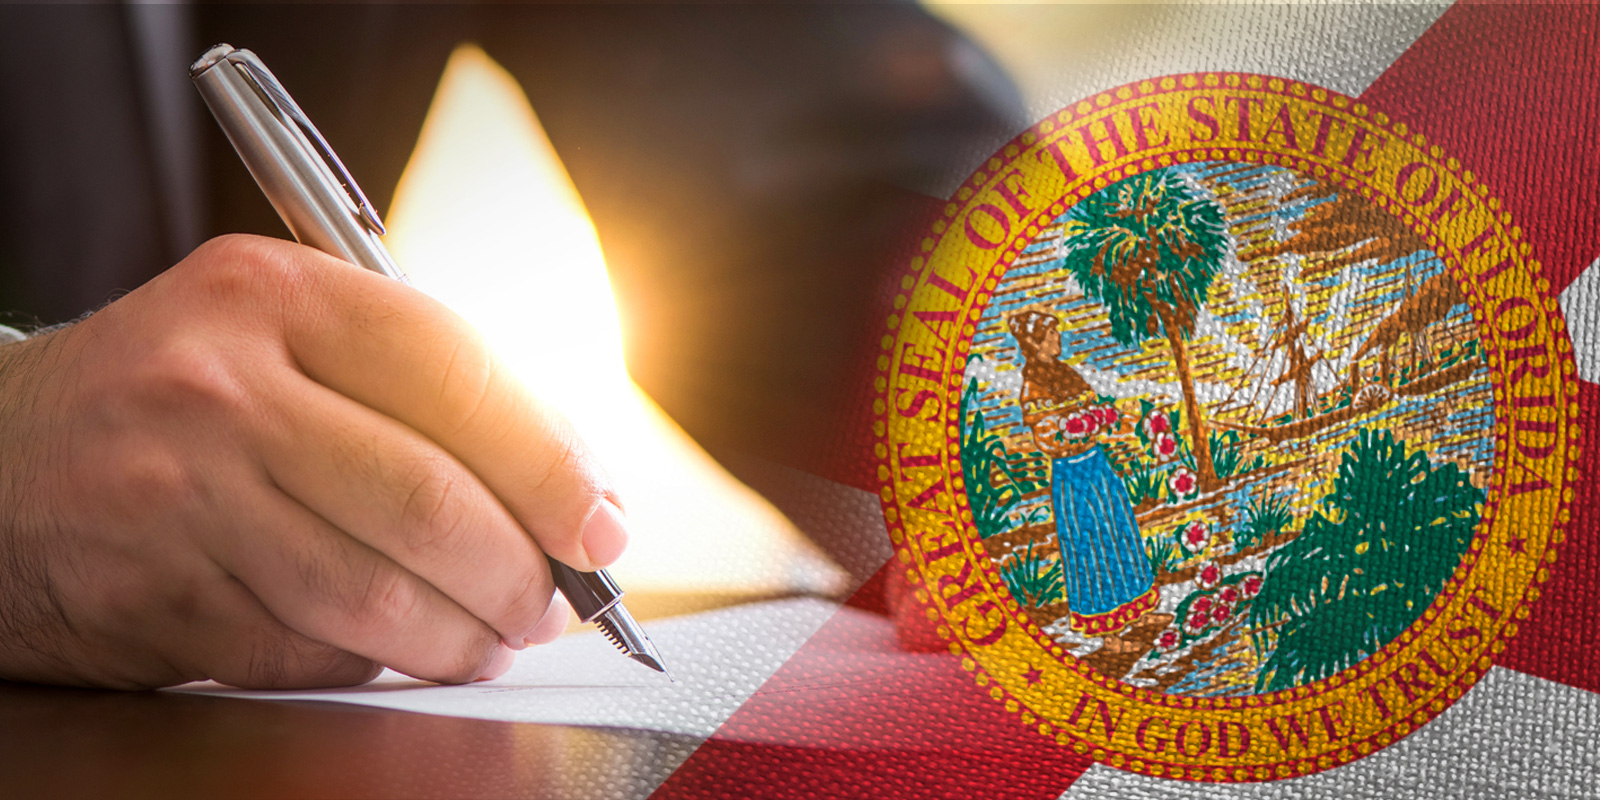 Florida_Governor_Signs_Sweeping_Tort_Reform_Bill_